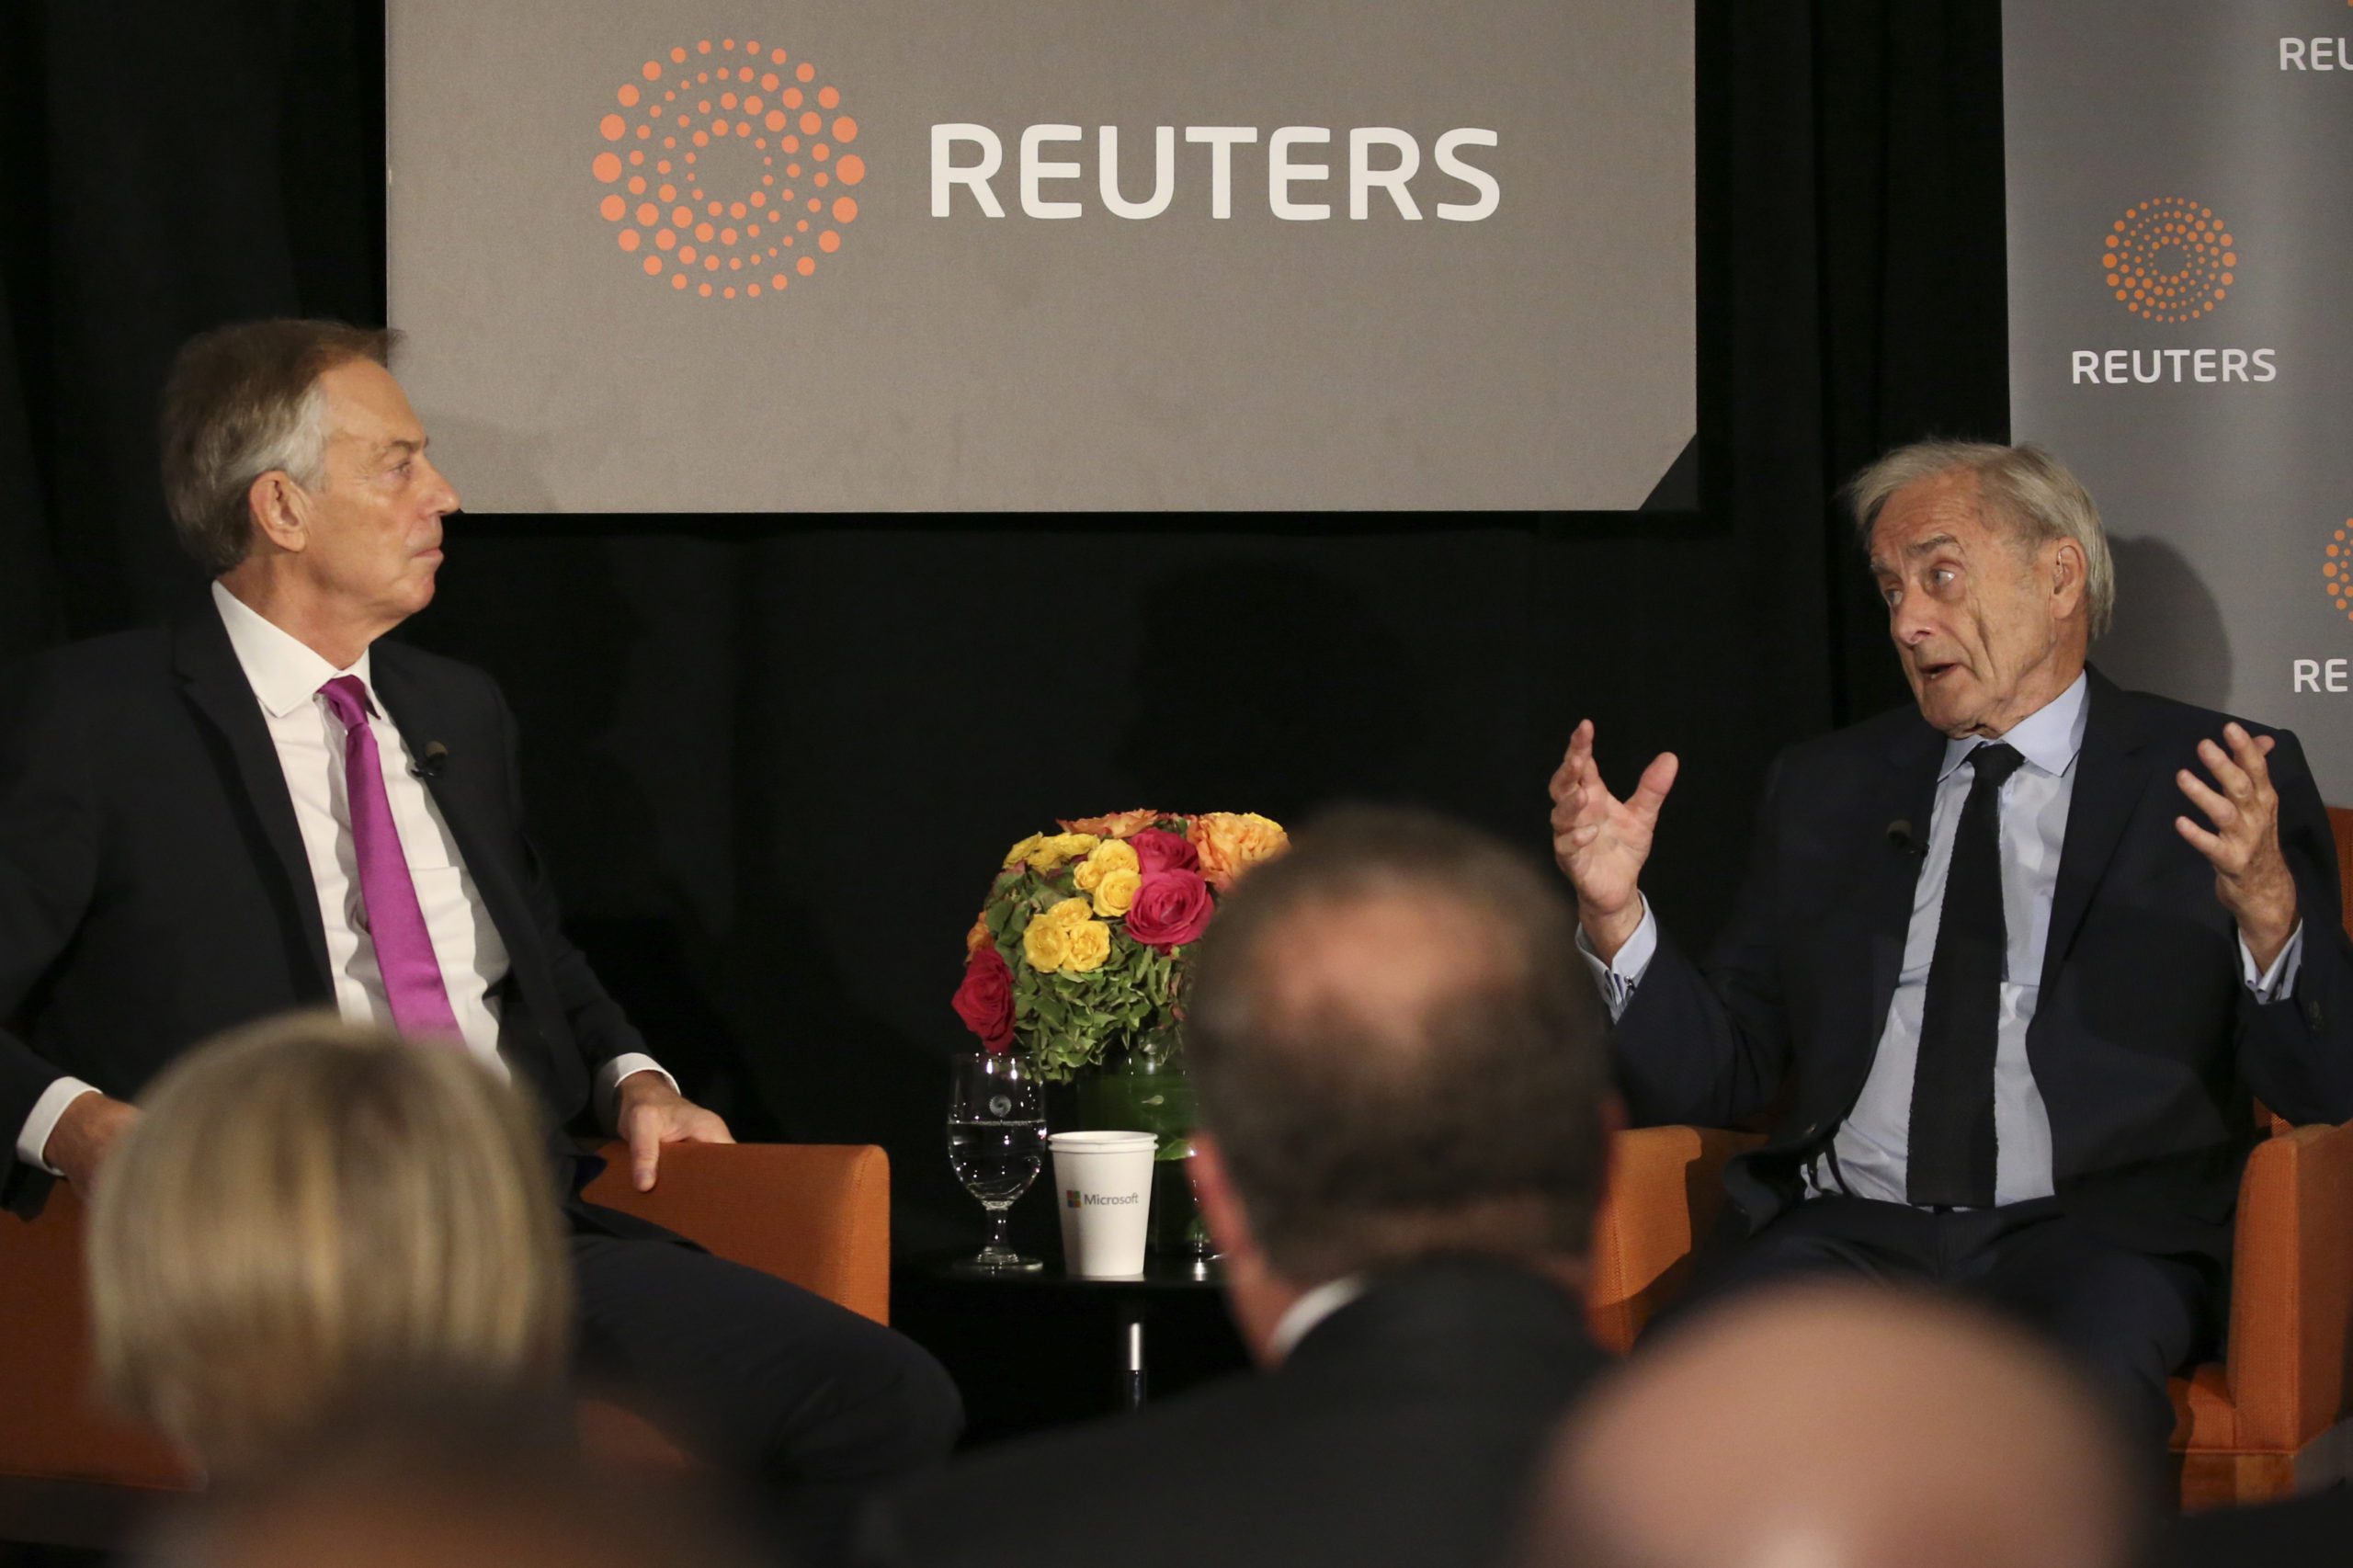 Former British Prime Minister Tony Blair looks on as Reuters Editor-at-Large Sir Harold Evans (R) moderates a Reuters Newsmaker conversation 